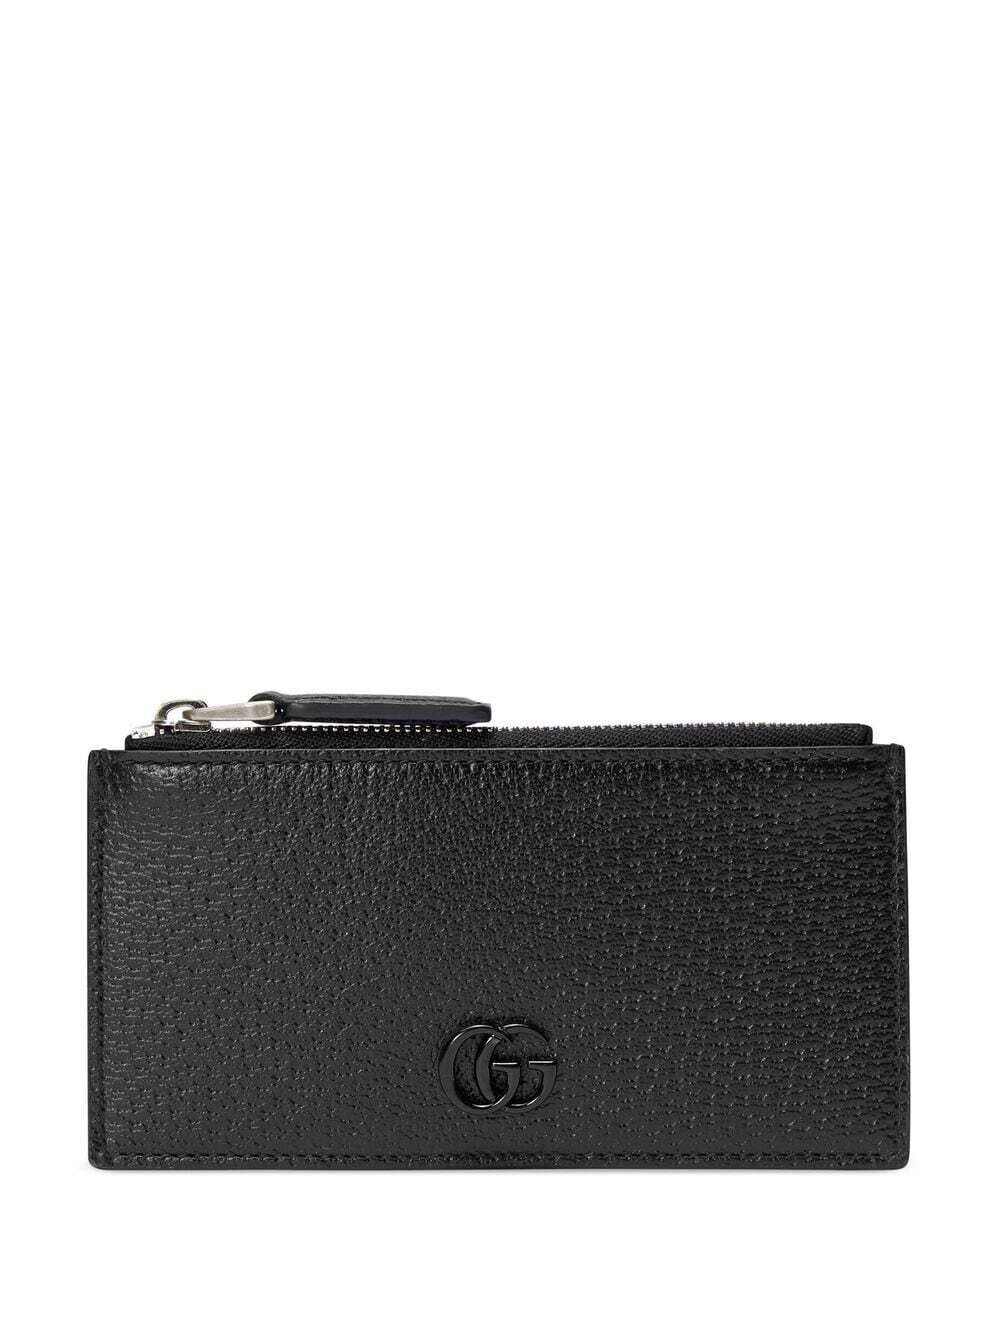 GUCCI - Gg Leather Wallet Gucci